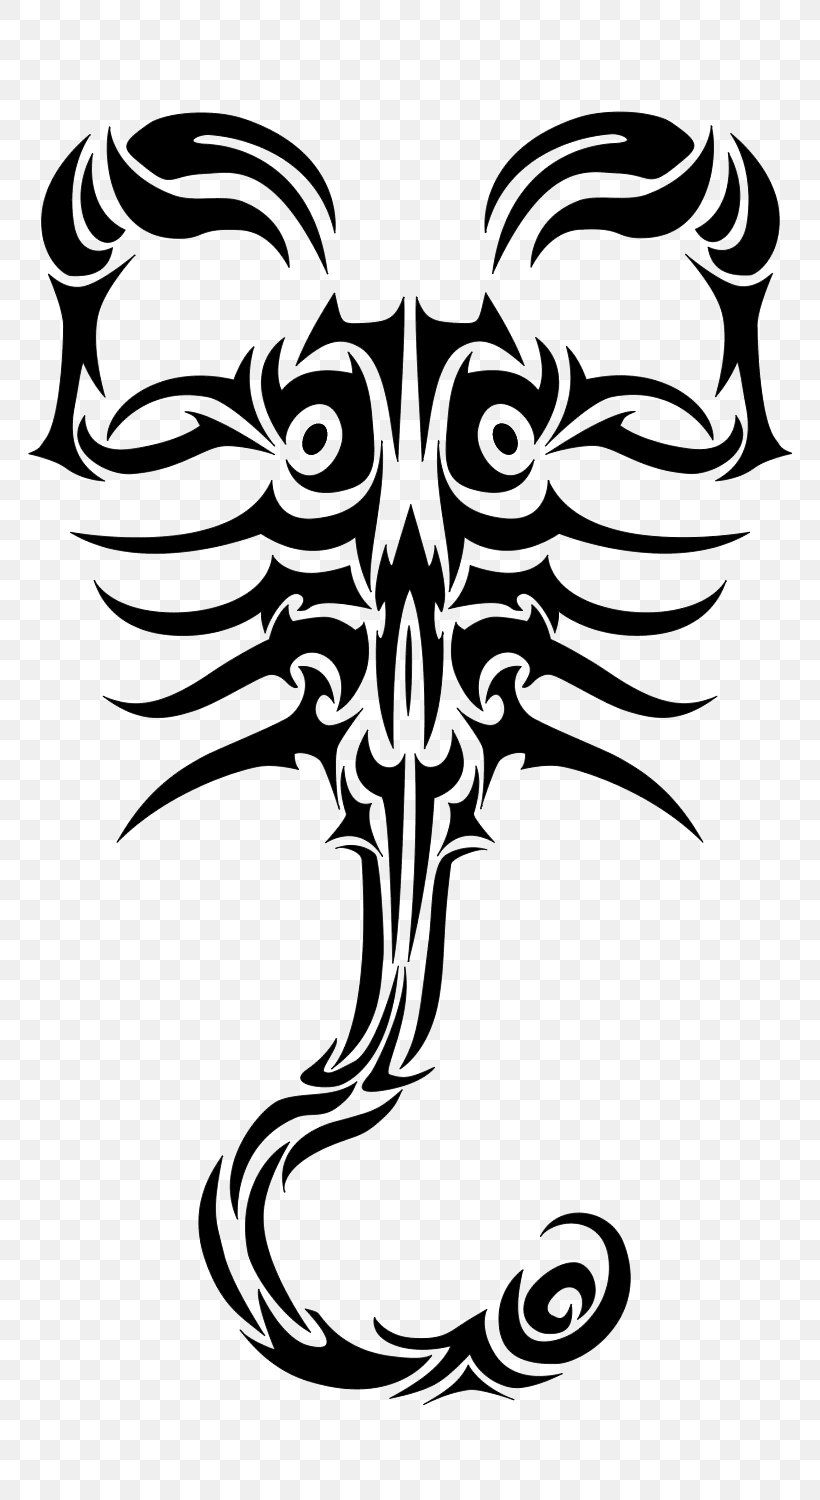 Download SCORPION TATTOOS Free PNG transparent image and clipart